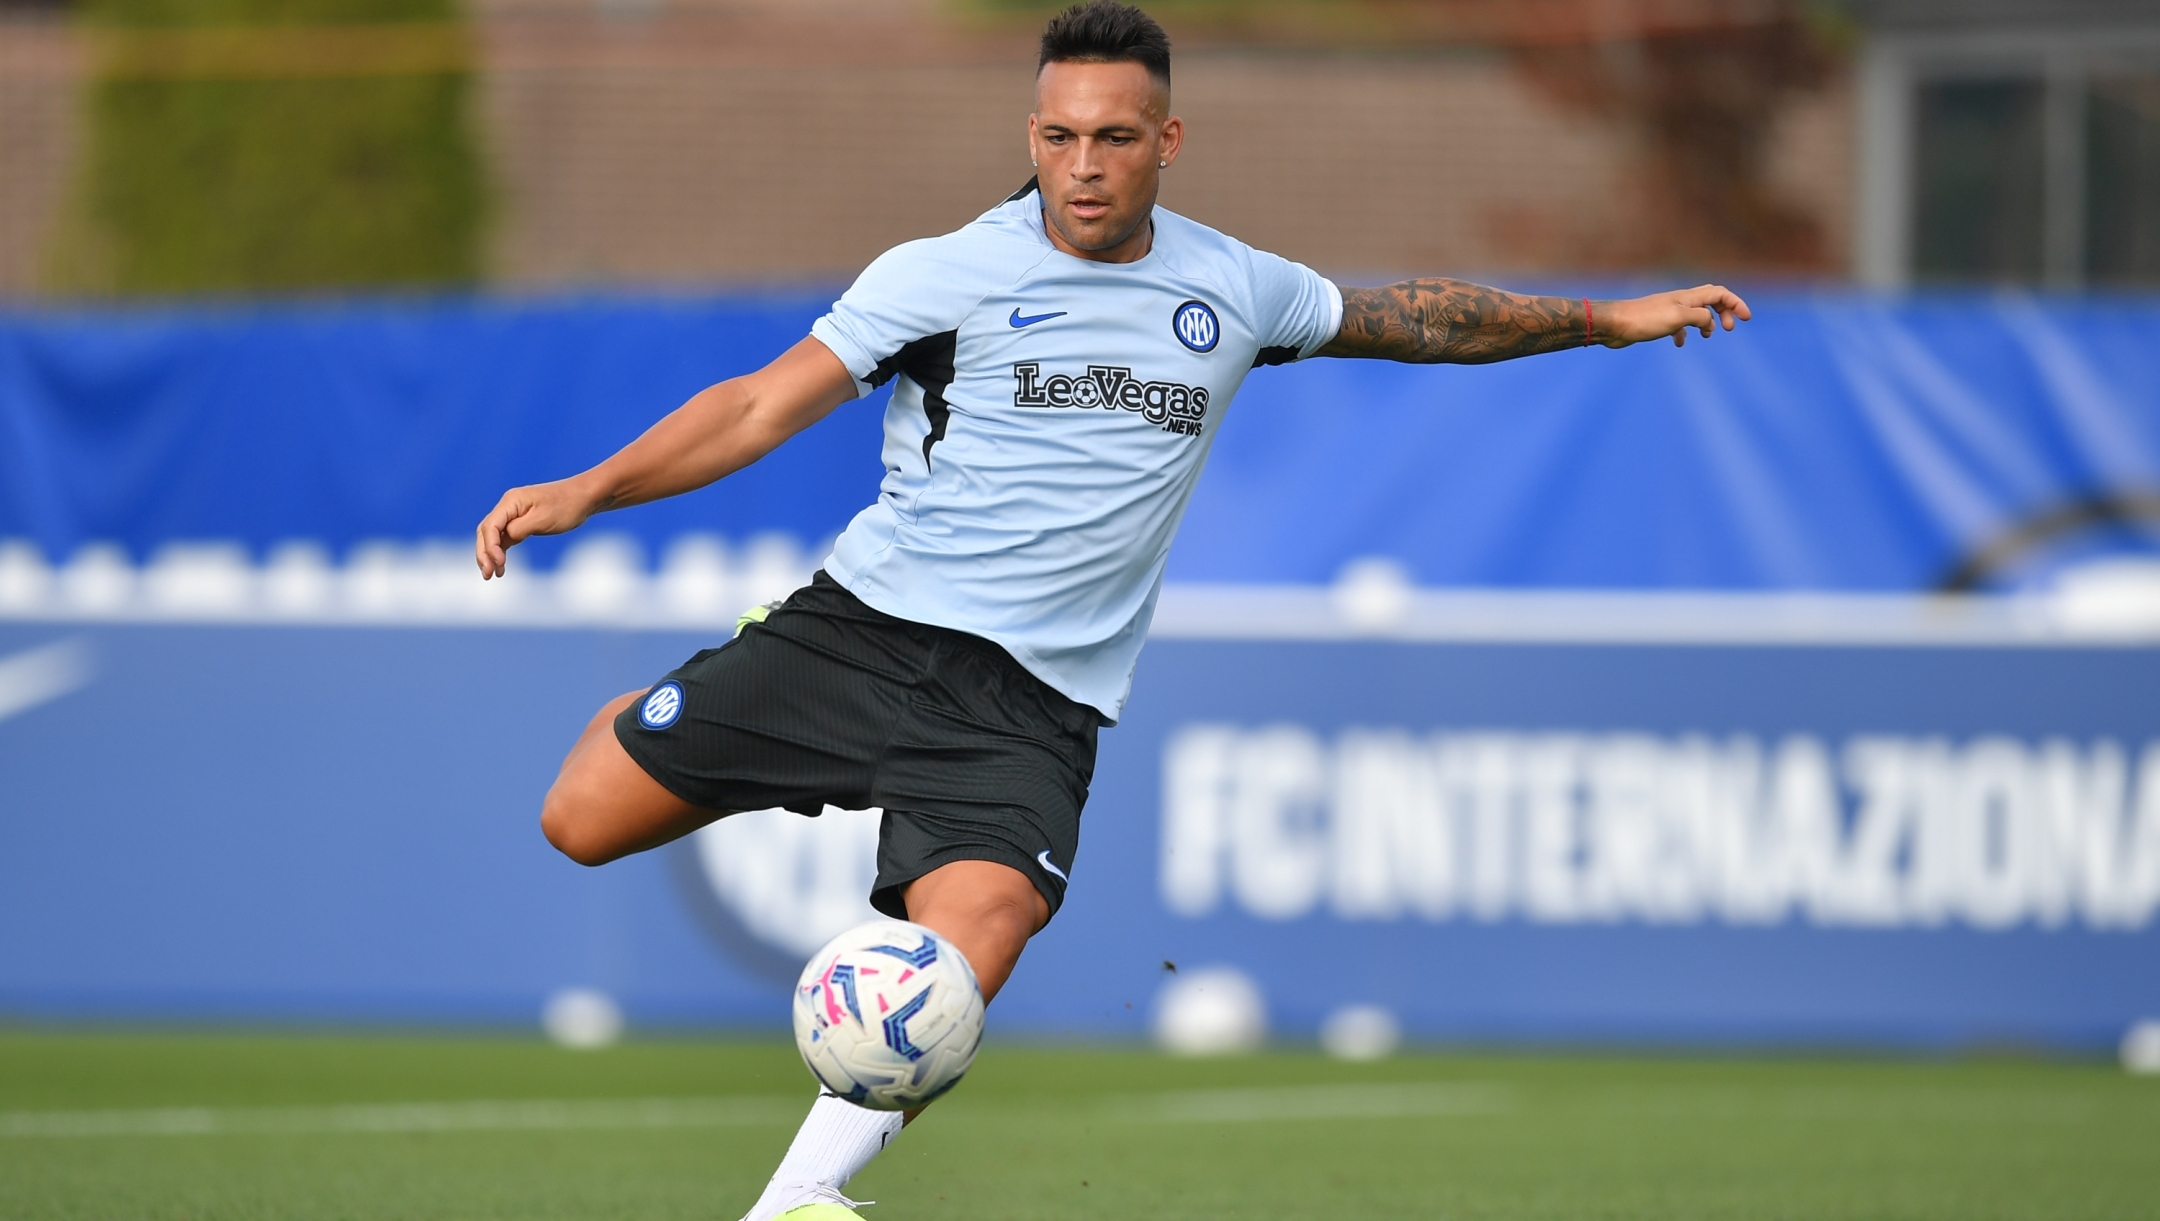 COMO, ITALY - JULY 19: Lautaro Martinez of FC Internazionale trains during the FC Internazionale training session at the club's training ground Suning Training Center at Appiano Gentile on July 19, 2023 in Como, Italy. (Photo by Mattia Pistoia - Inter/Inter via Getty Images)